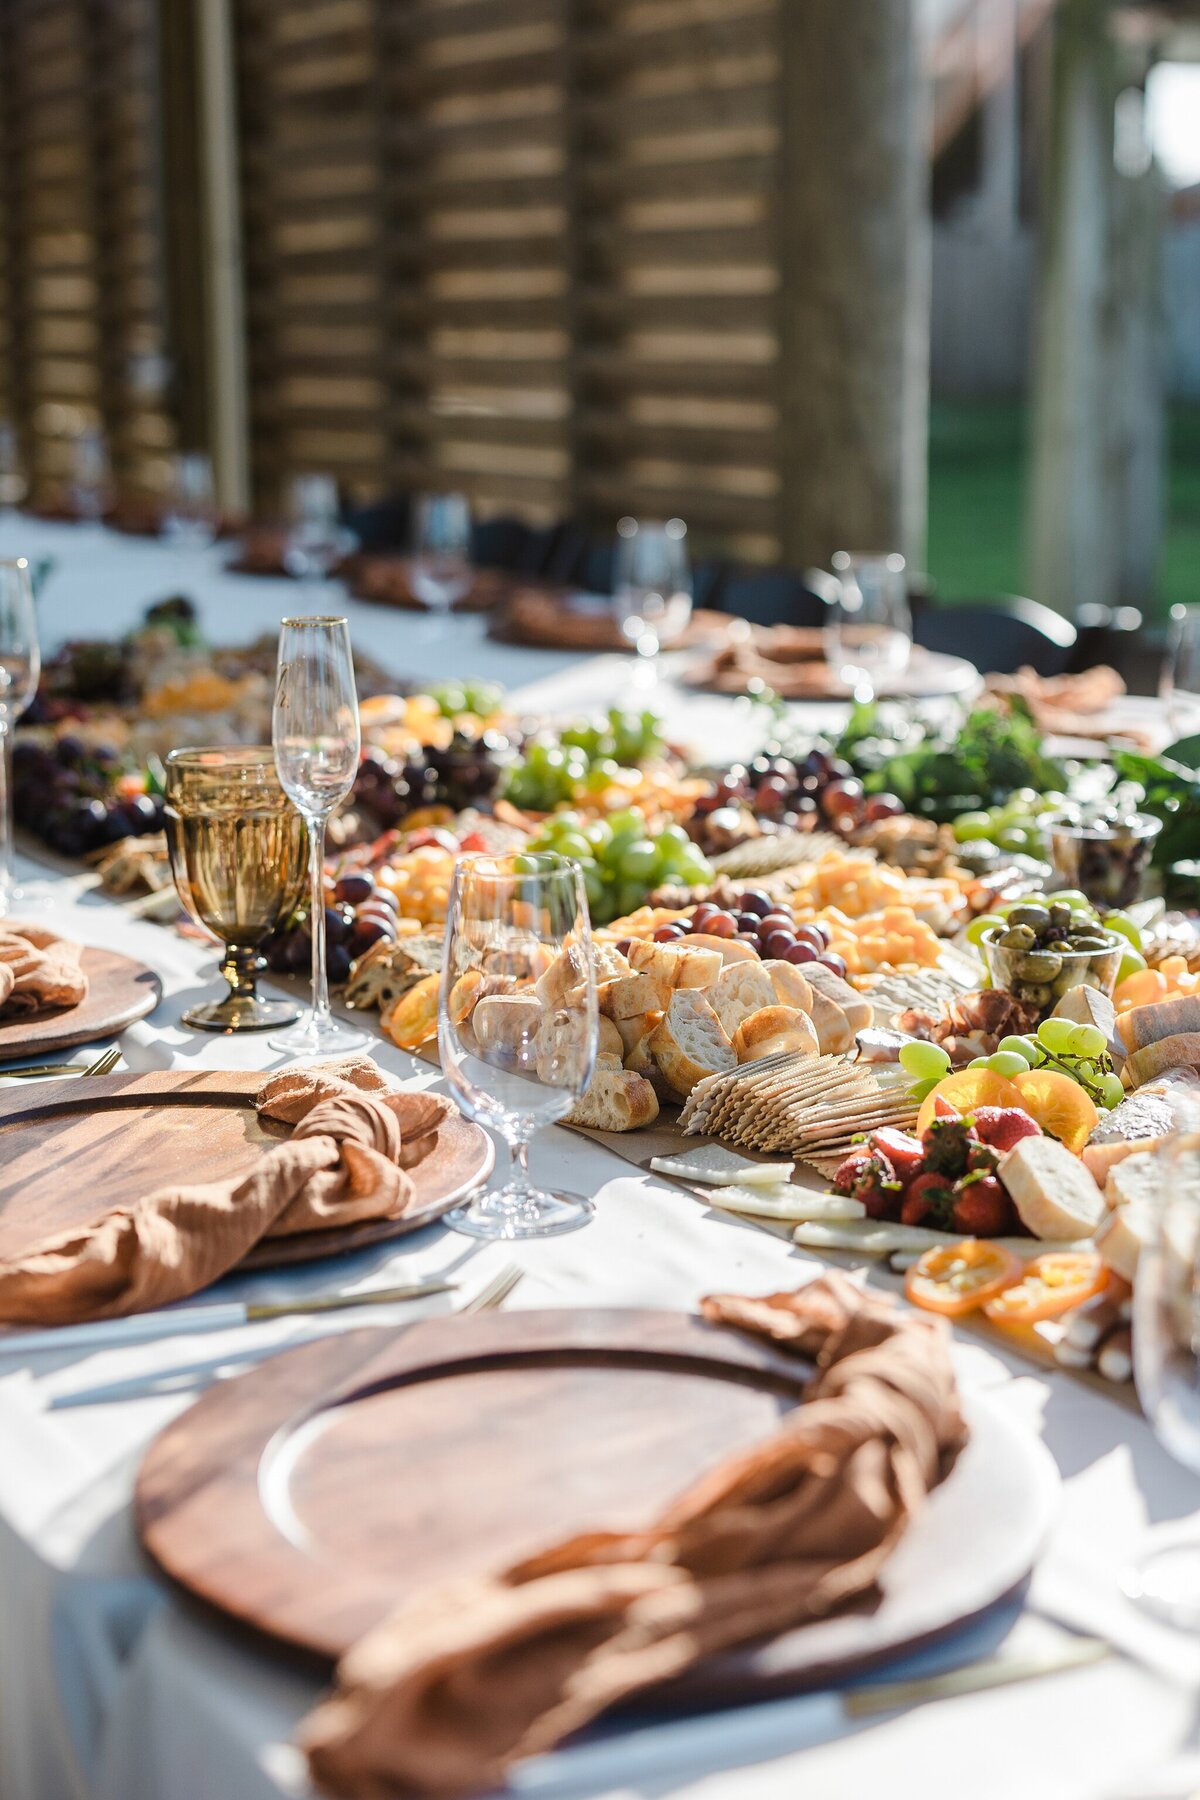 A detail shot of a reception table at a wedding in Crystal Beach, Texas. Multiple place settings surround the edges of the table using wooden plates, napkins, cutlery, and glasses. The middle of the table is made up of a large assortment of meats, cheeses, crackers, and fruits all in one large spread.